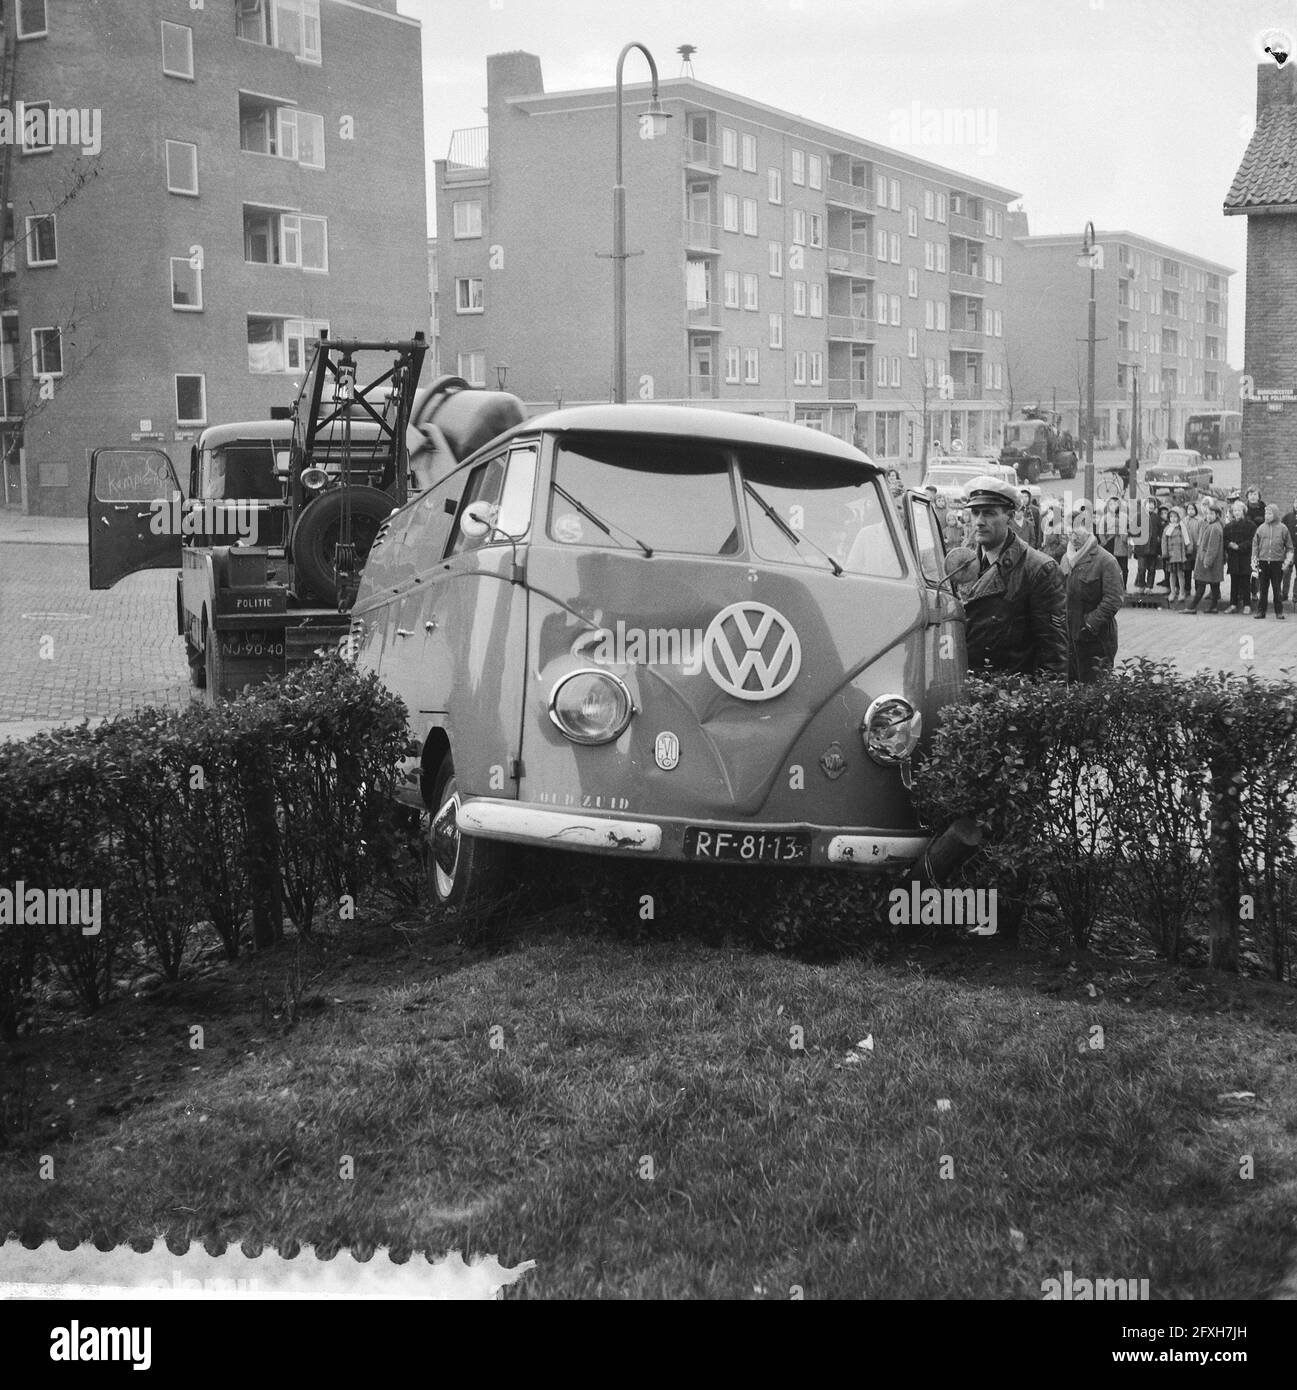 Volkswagen van in garden, by collision in Nieuw West, December 16, 1959, Collisions, gardens, The Netherlands, 20th century press agency photo, news to remember, documentary, historic photography 1945-1990, visual stories, human history of the Twentieth Century, capturing moments in time Stock Photo